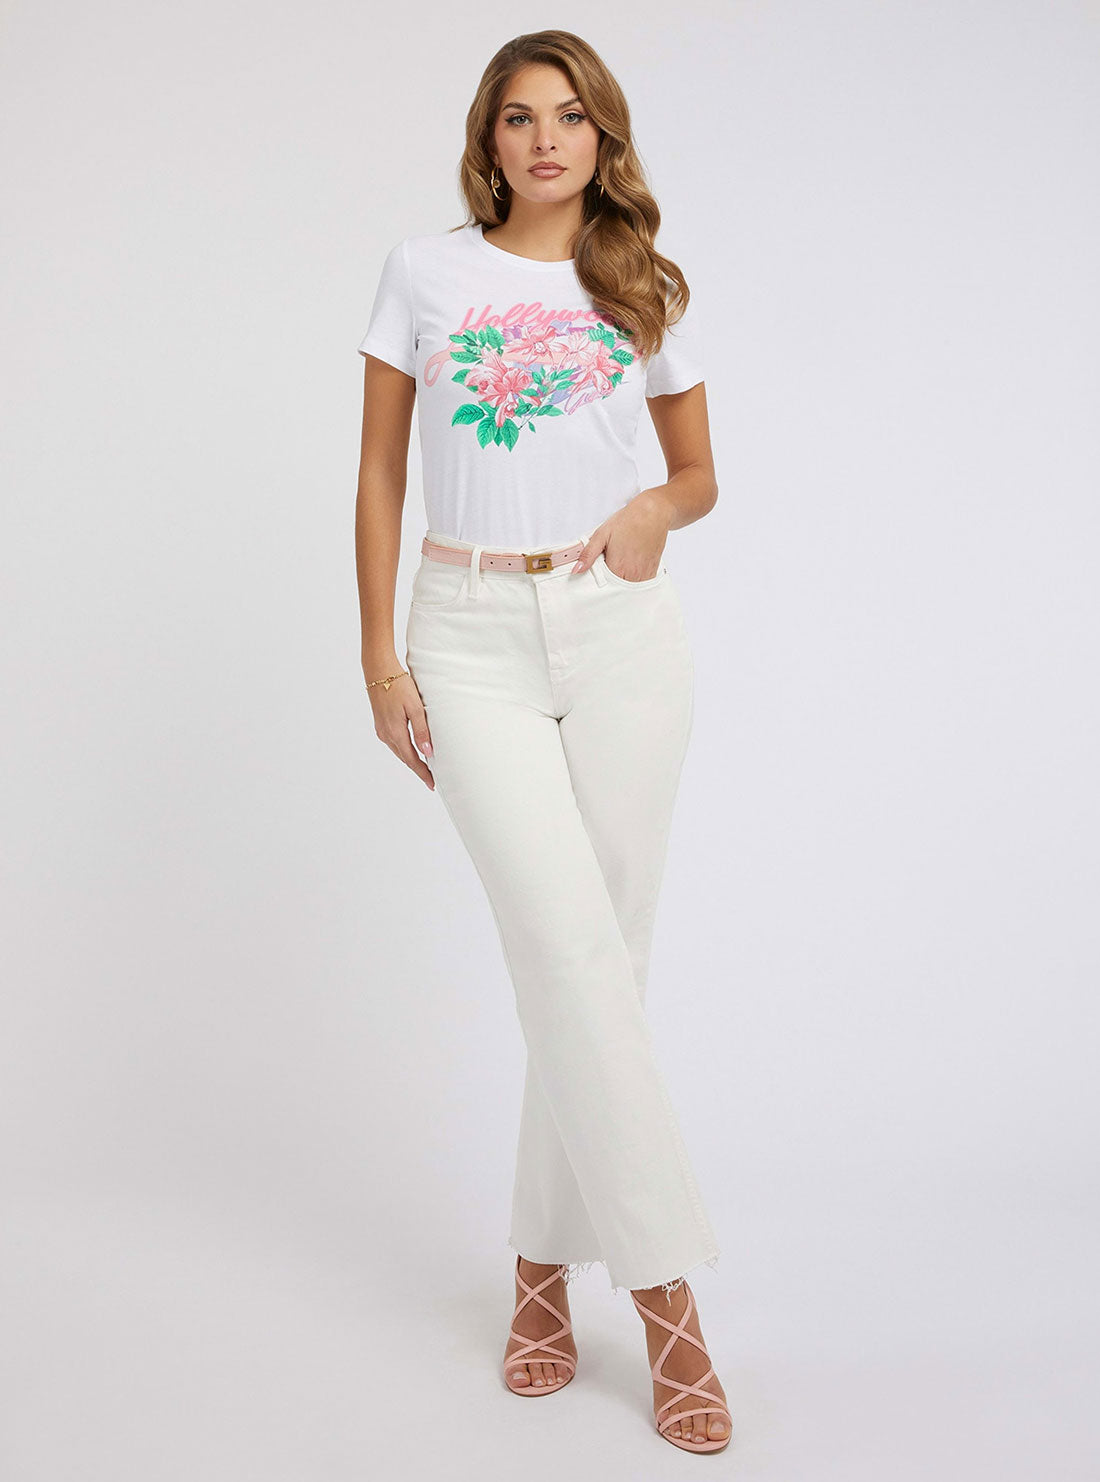 White Floral Print Hollywood T-Shirt | GUESS Women's | Full view